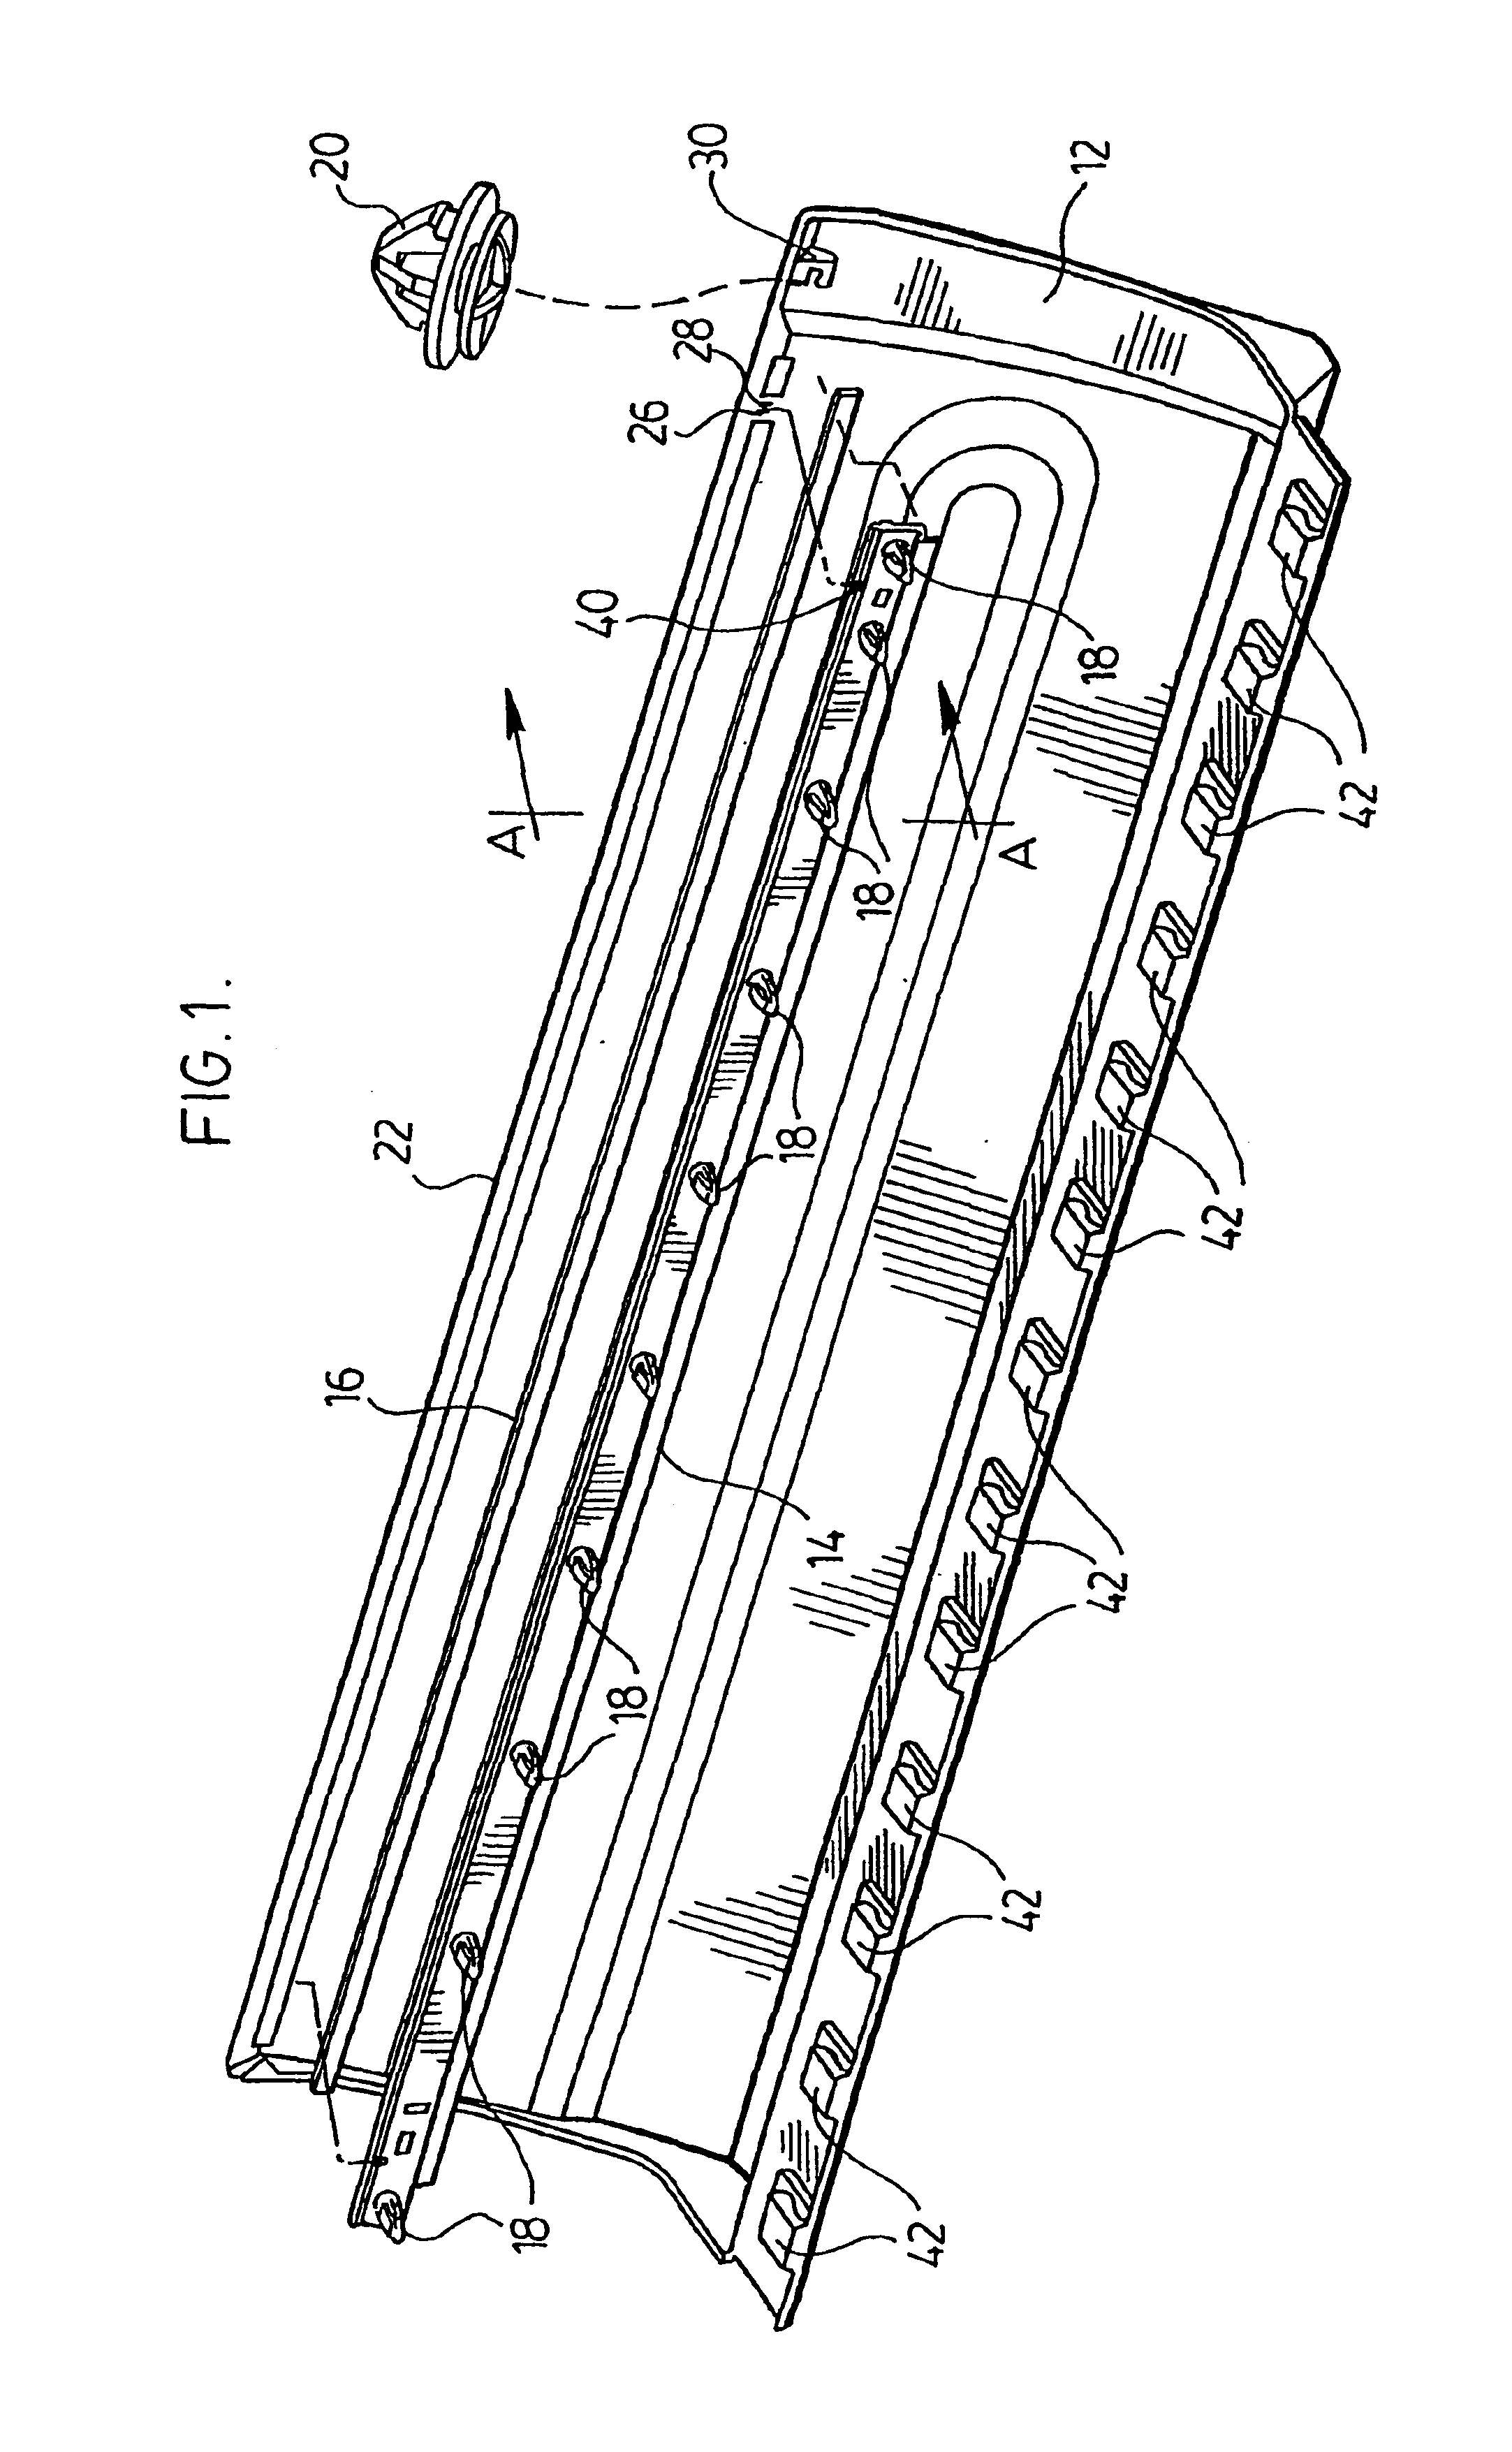 Method of attaching a cladding to a vehicle